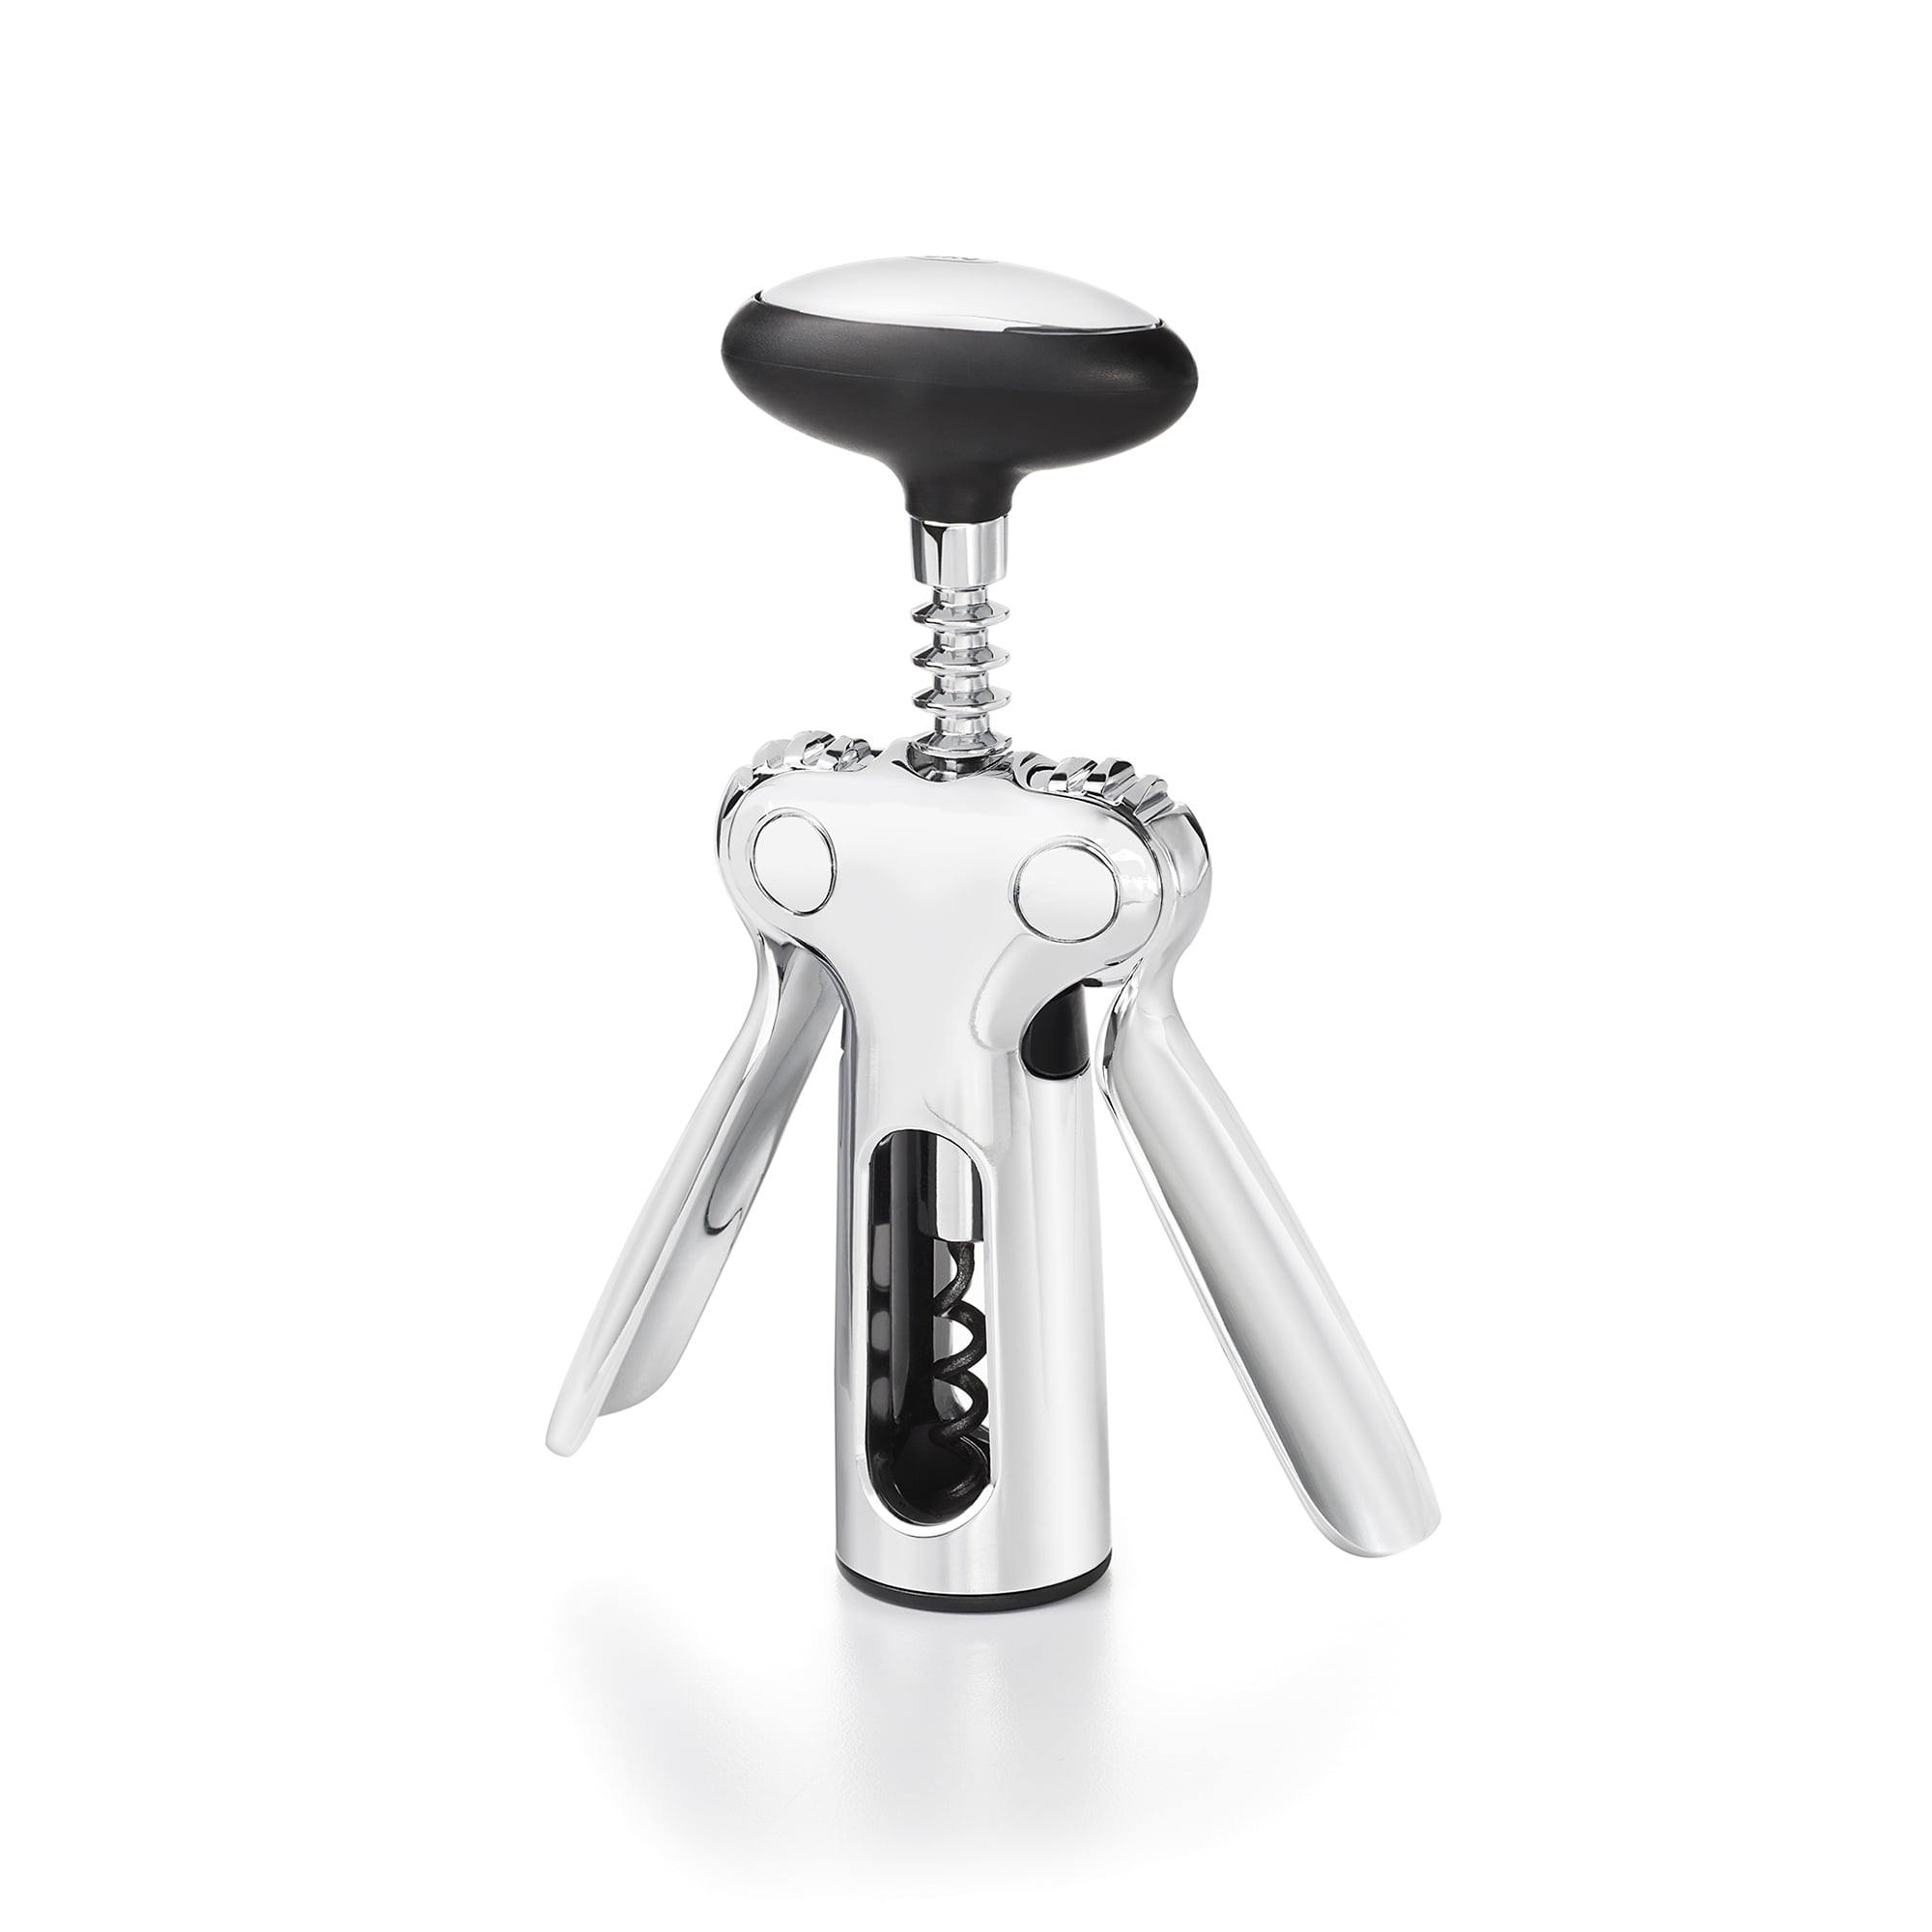 Oxo Wine Stopper, Delivery Near You